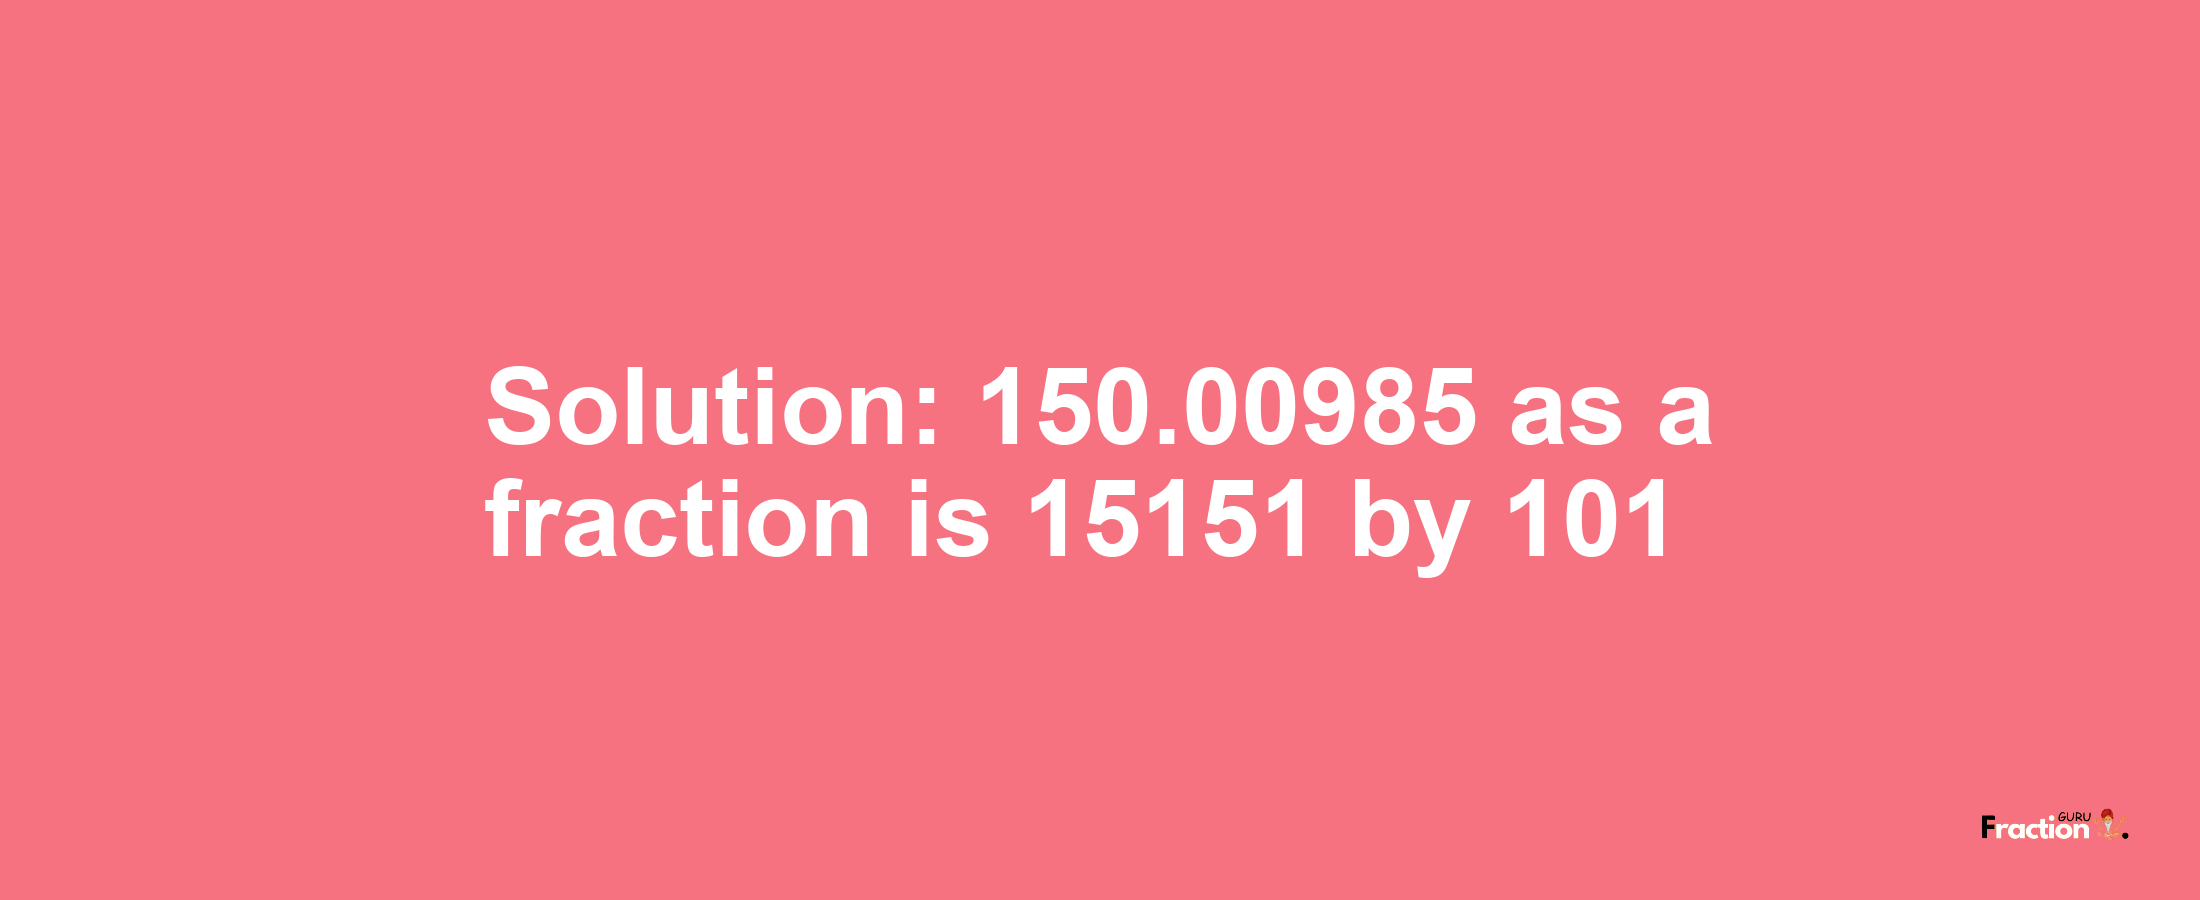 Solution:150.00985 as a fraction is 15151/101